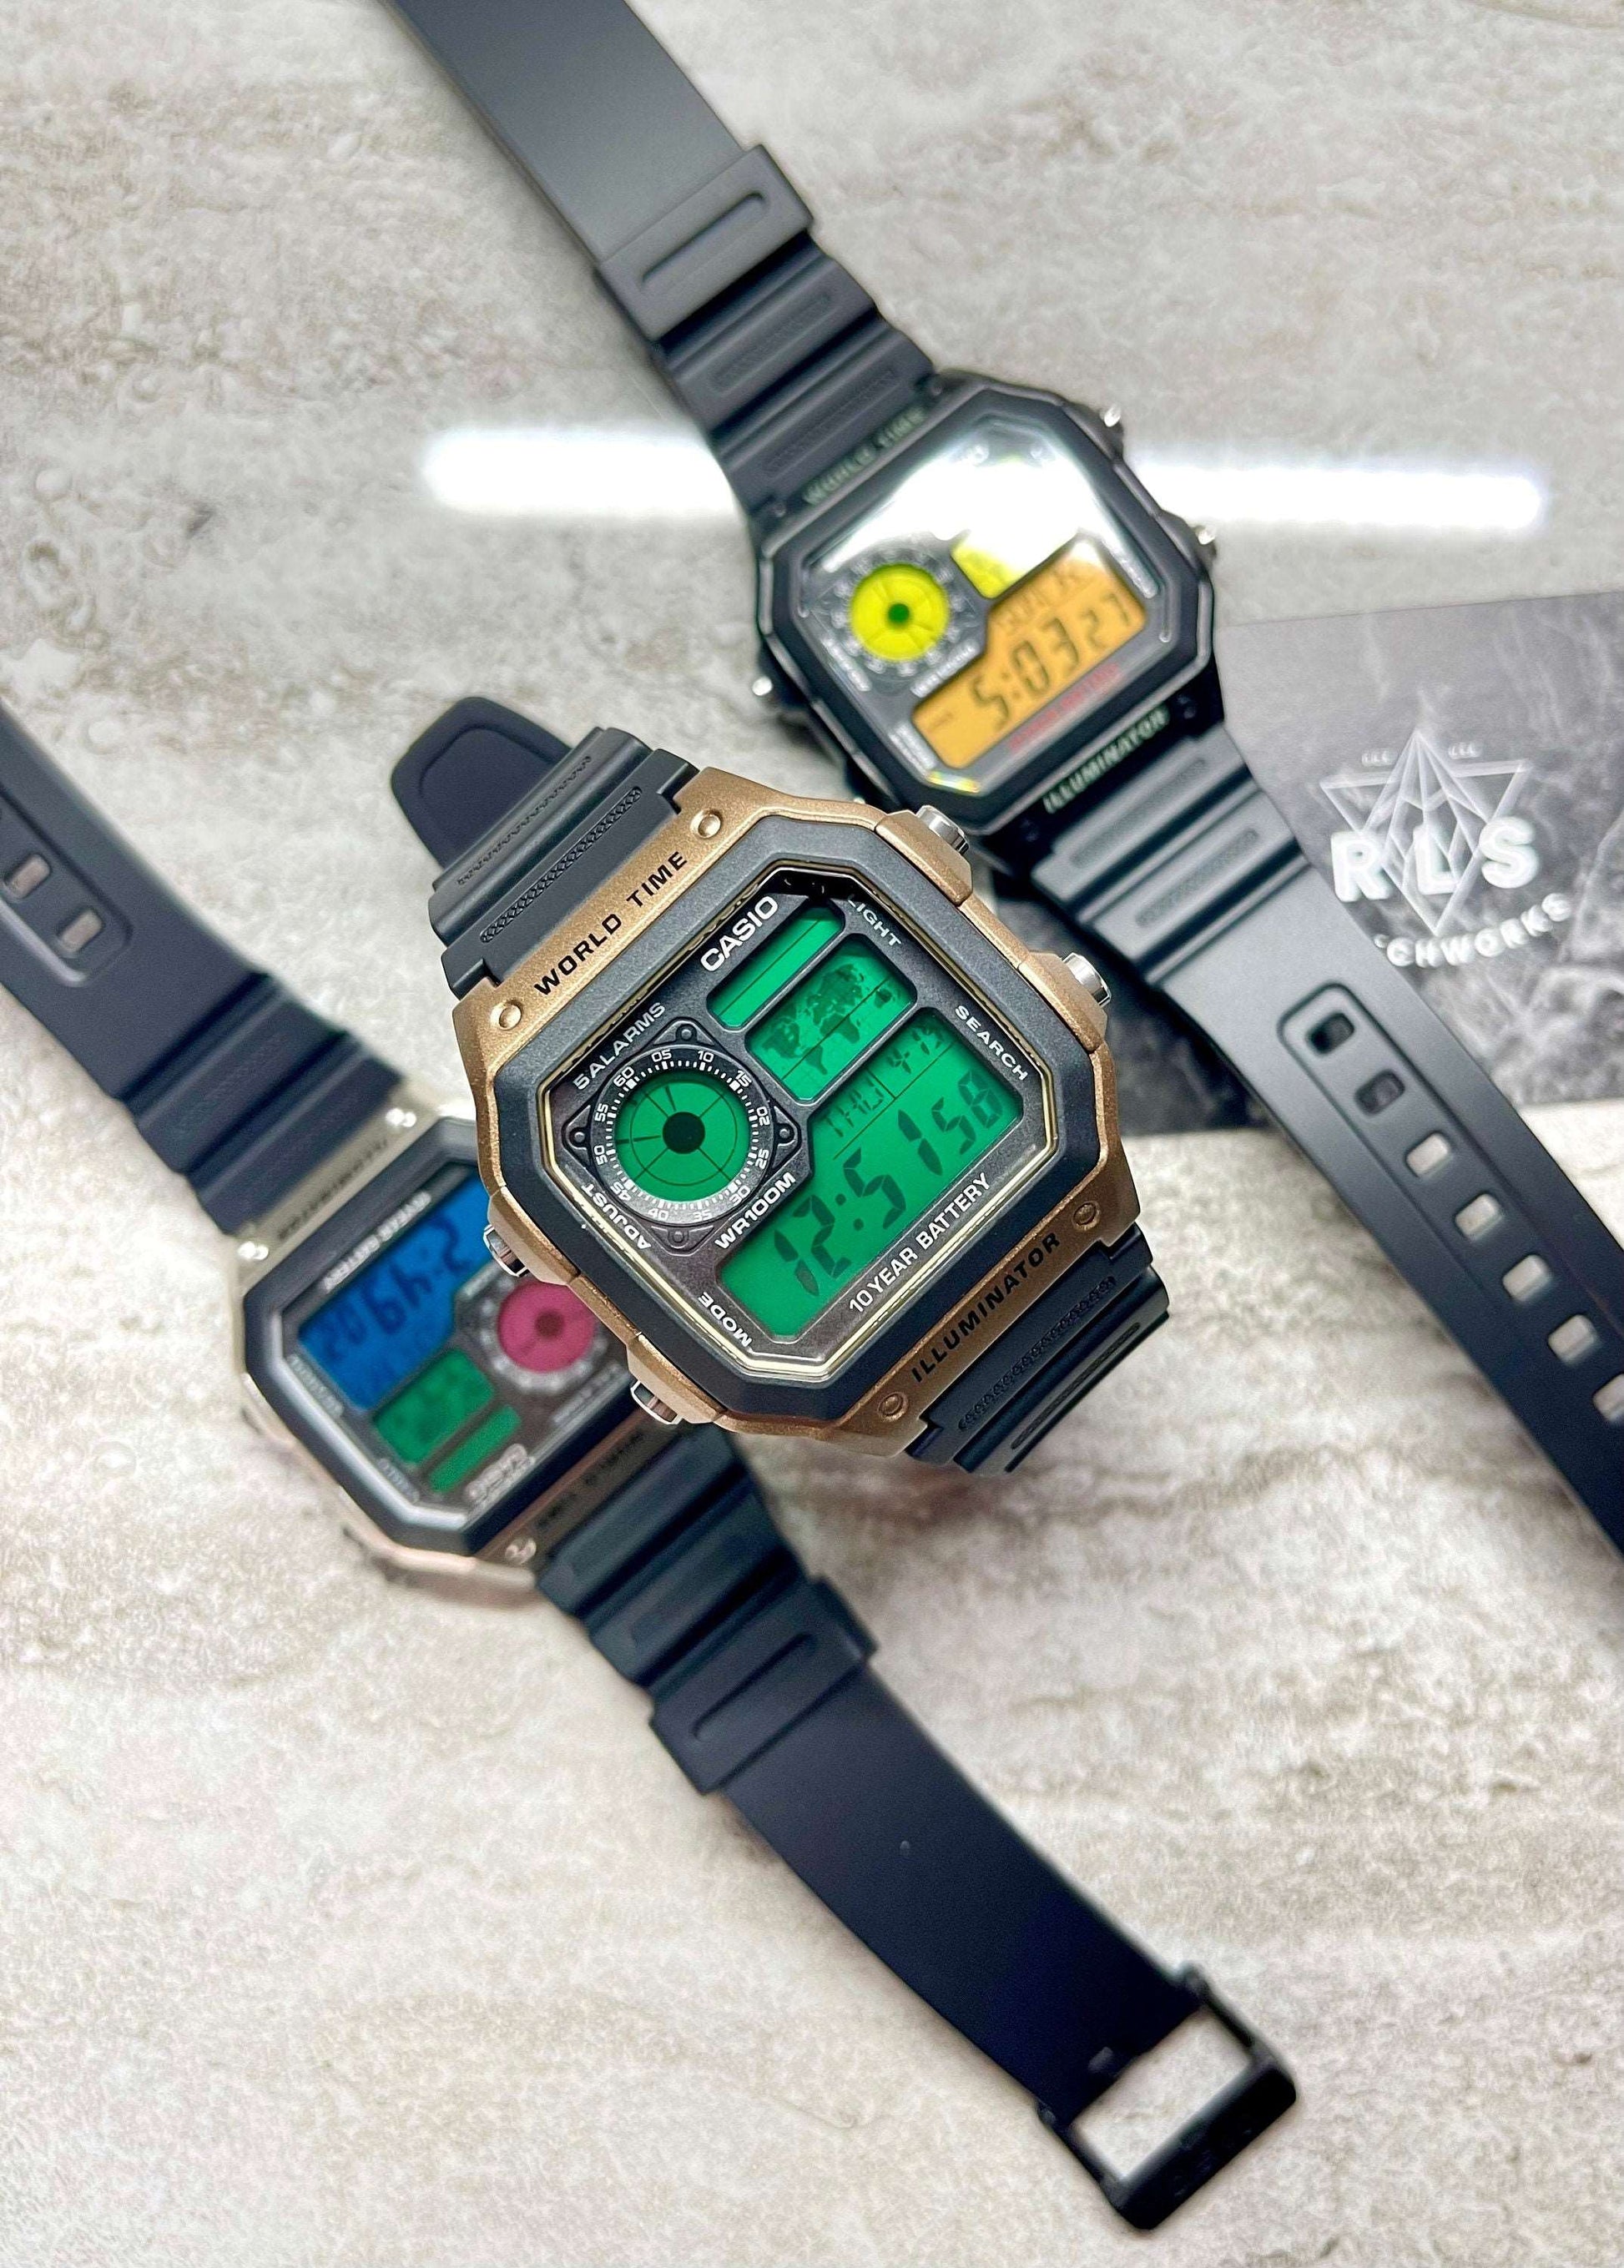 Custom Casio World Time Watch, Silver, Black, Gold with Color Screen Mod (Pick your colors)